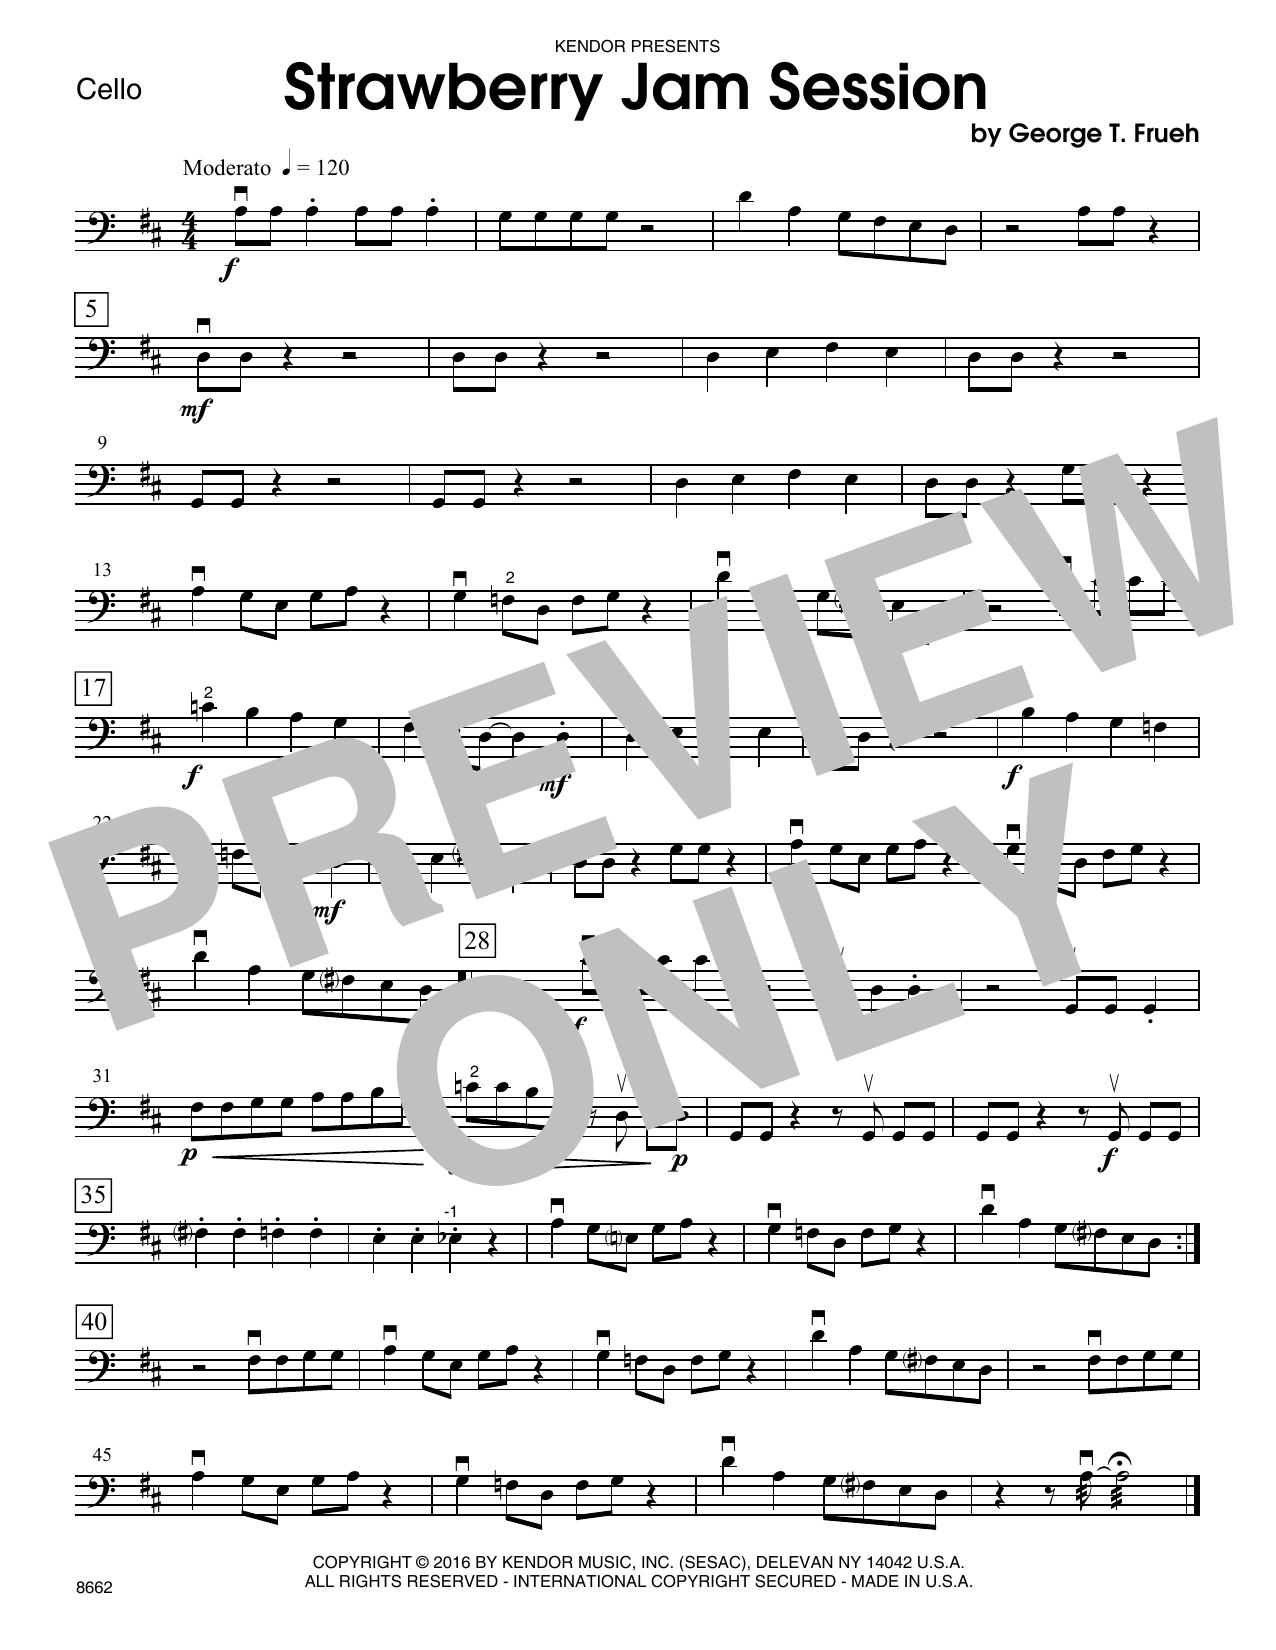 Download George T. Frueh Strawberry Jam Session - Cello Sheet Music